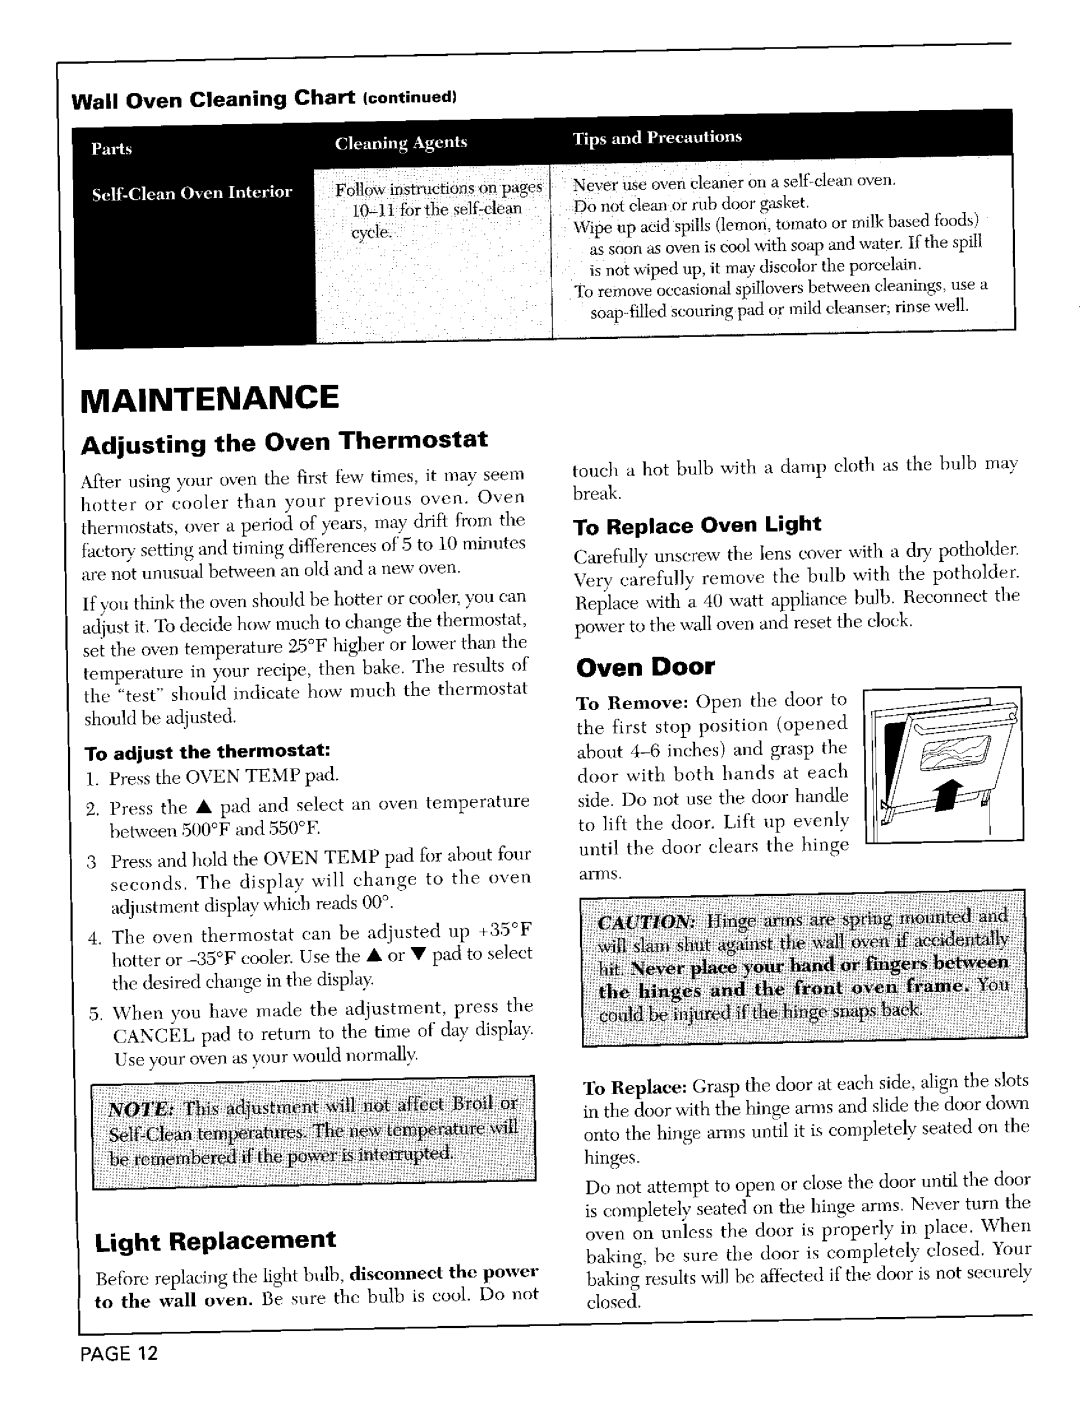 Maytag CWE9030D Maintenance, Light Replacement, Ovell Door, Adjusting the Oven Thermostat, TO adjust the thermostat 